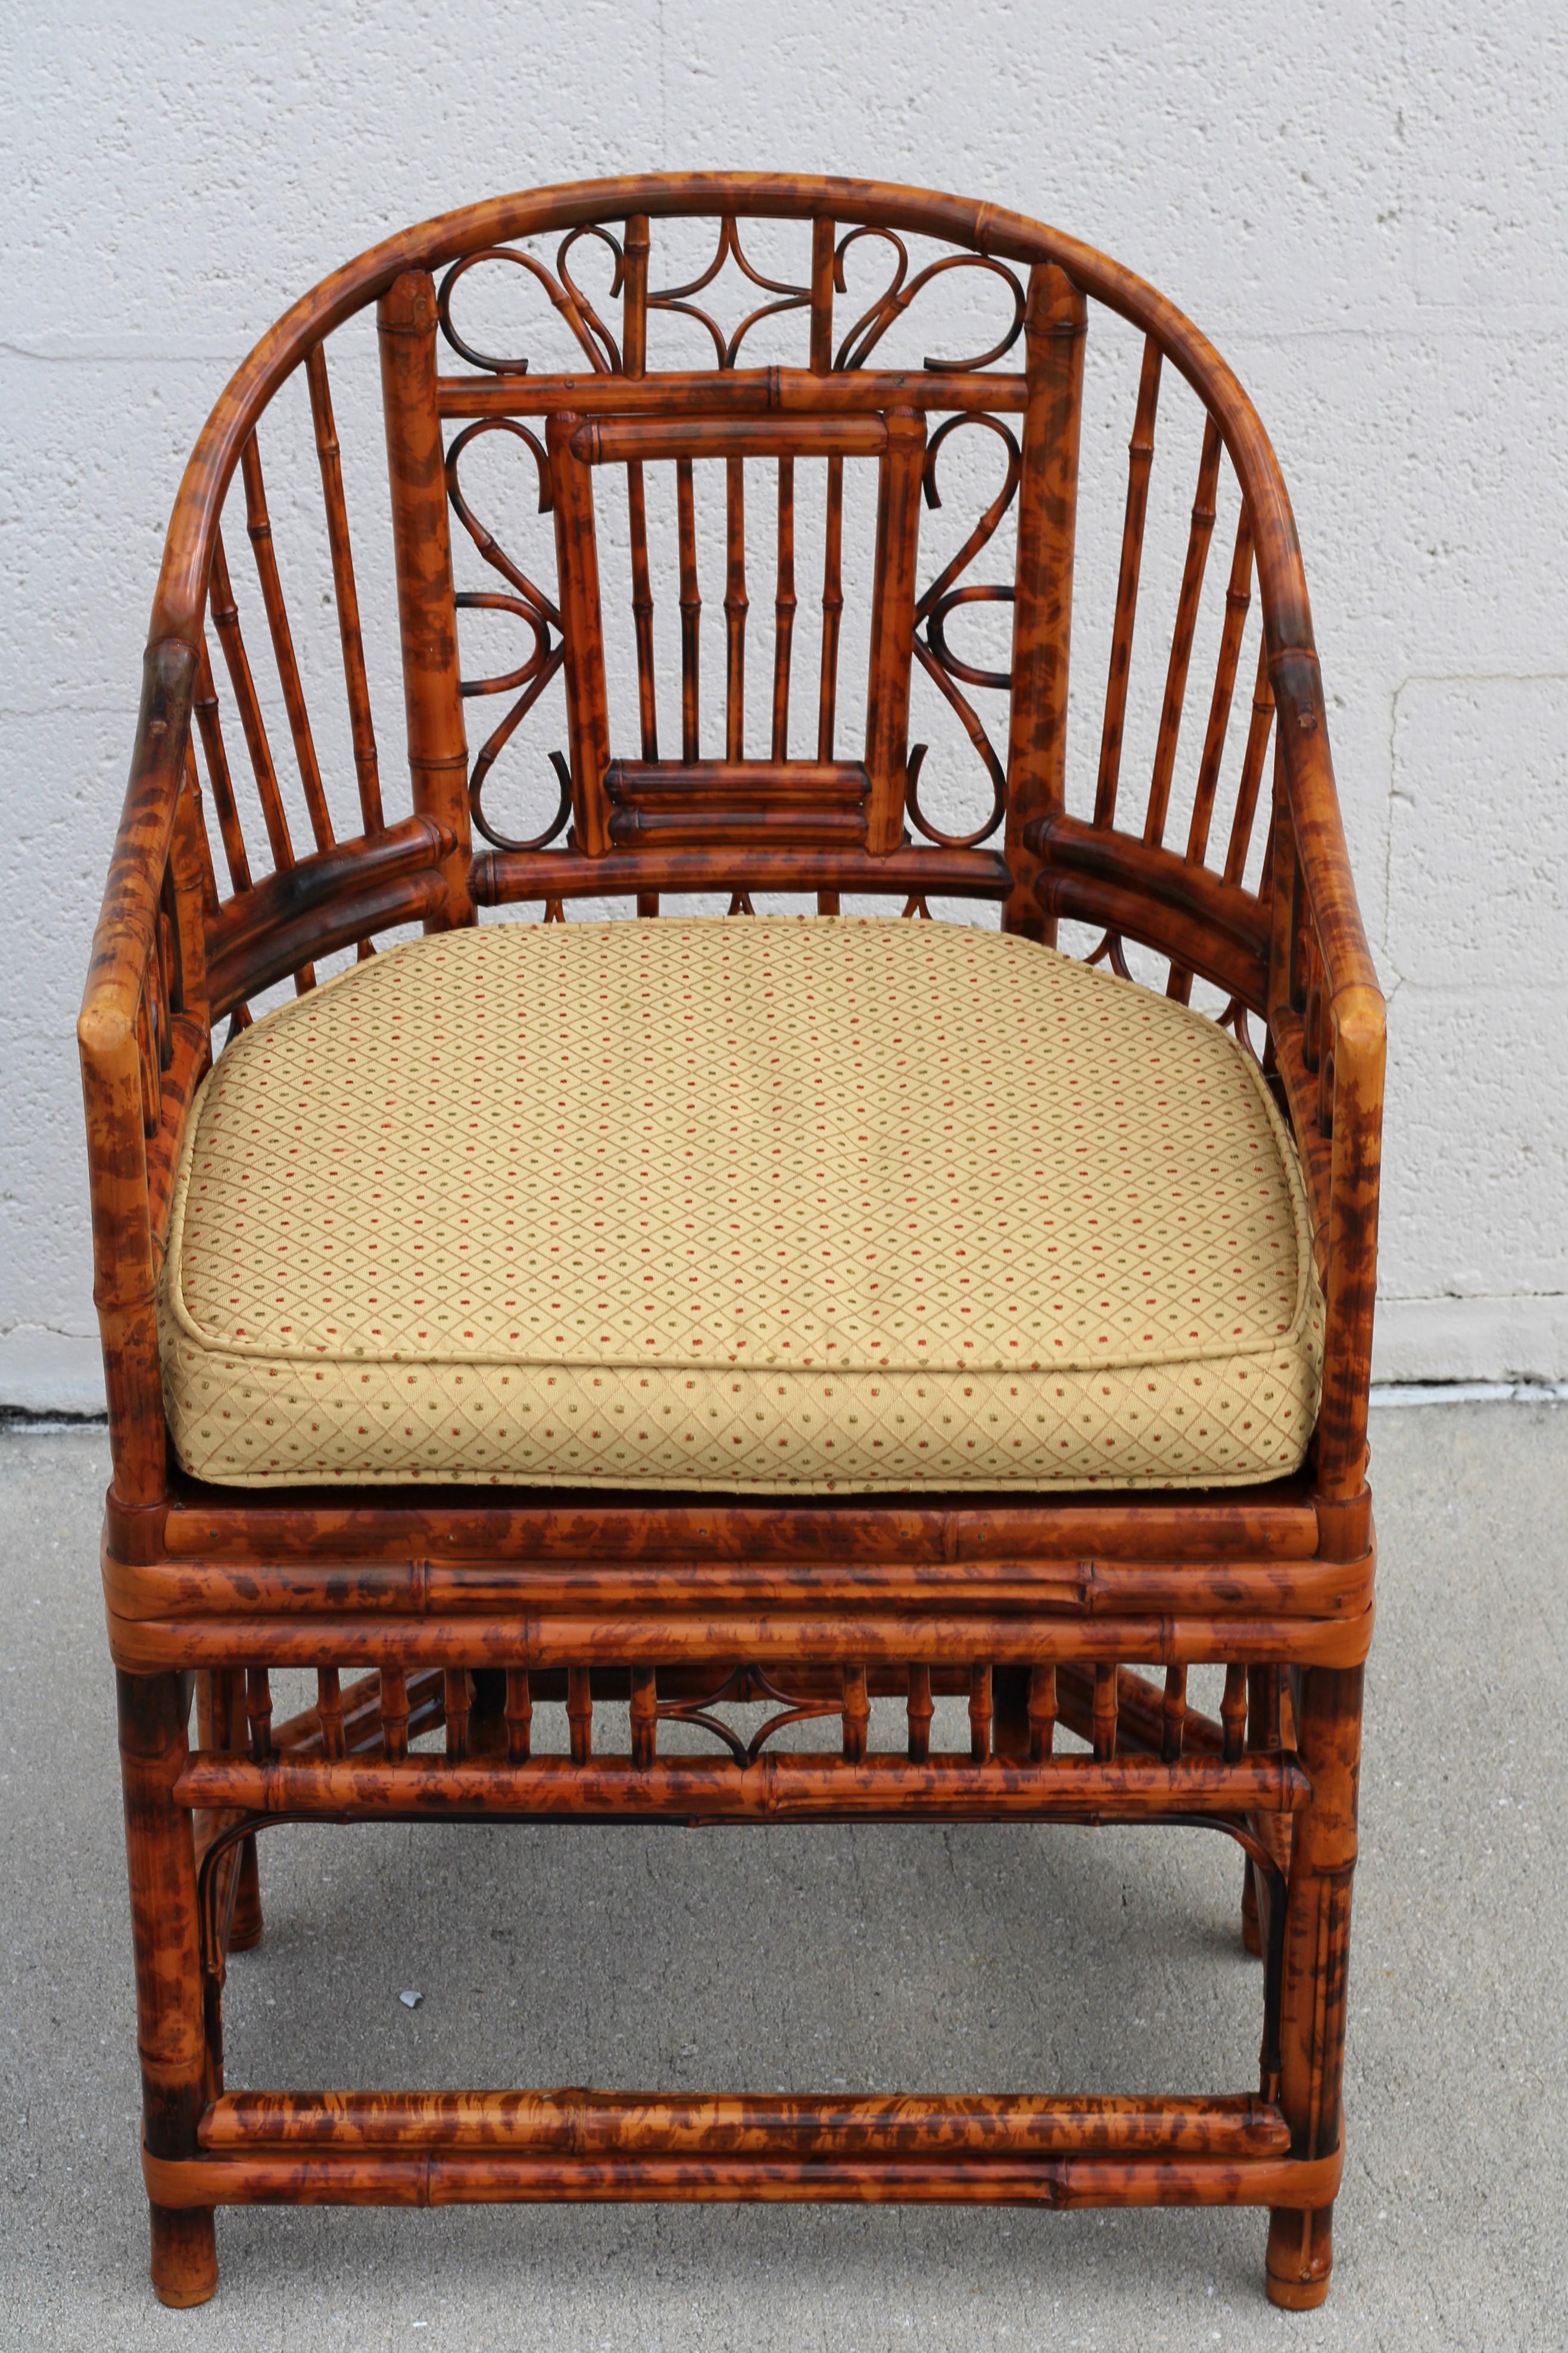 Stunning pair of burnt bamboo armchairs with gracefully shaped horseshoe frames, in the Brighton Pavilion style. These Chinese Chippendale chairs feature a beautiful burnt bamboo tortoiseshell finish, caned-bottom seats, and intricate bamboo open